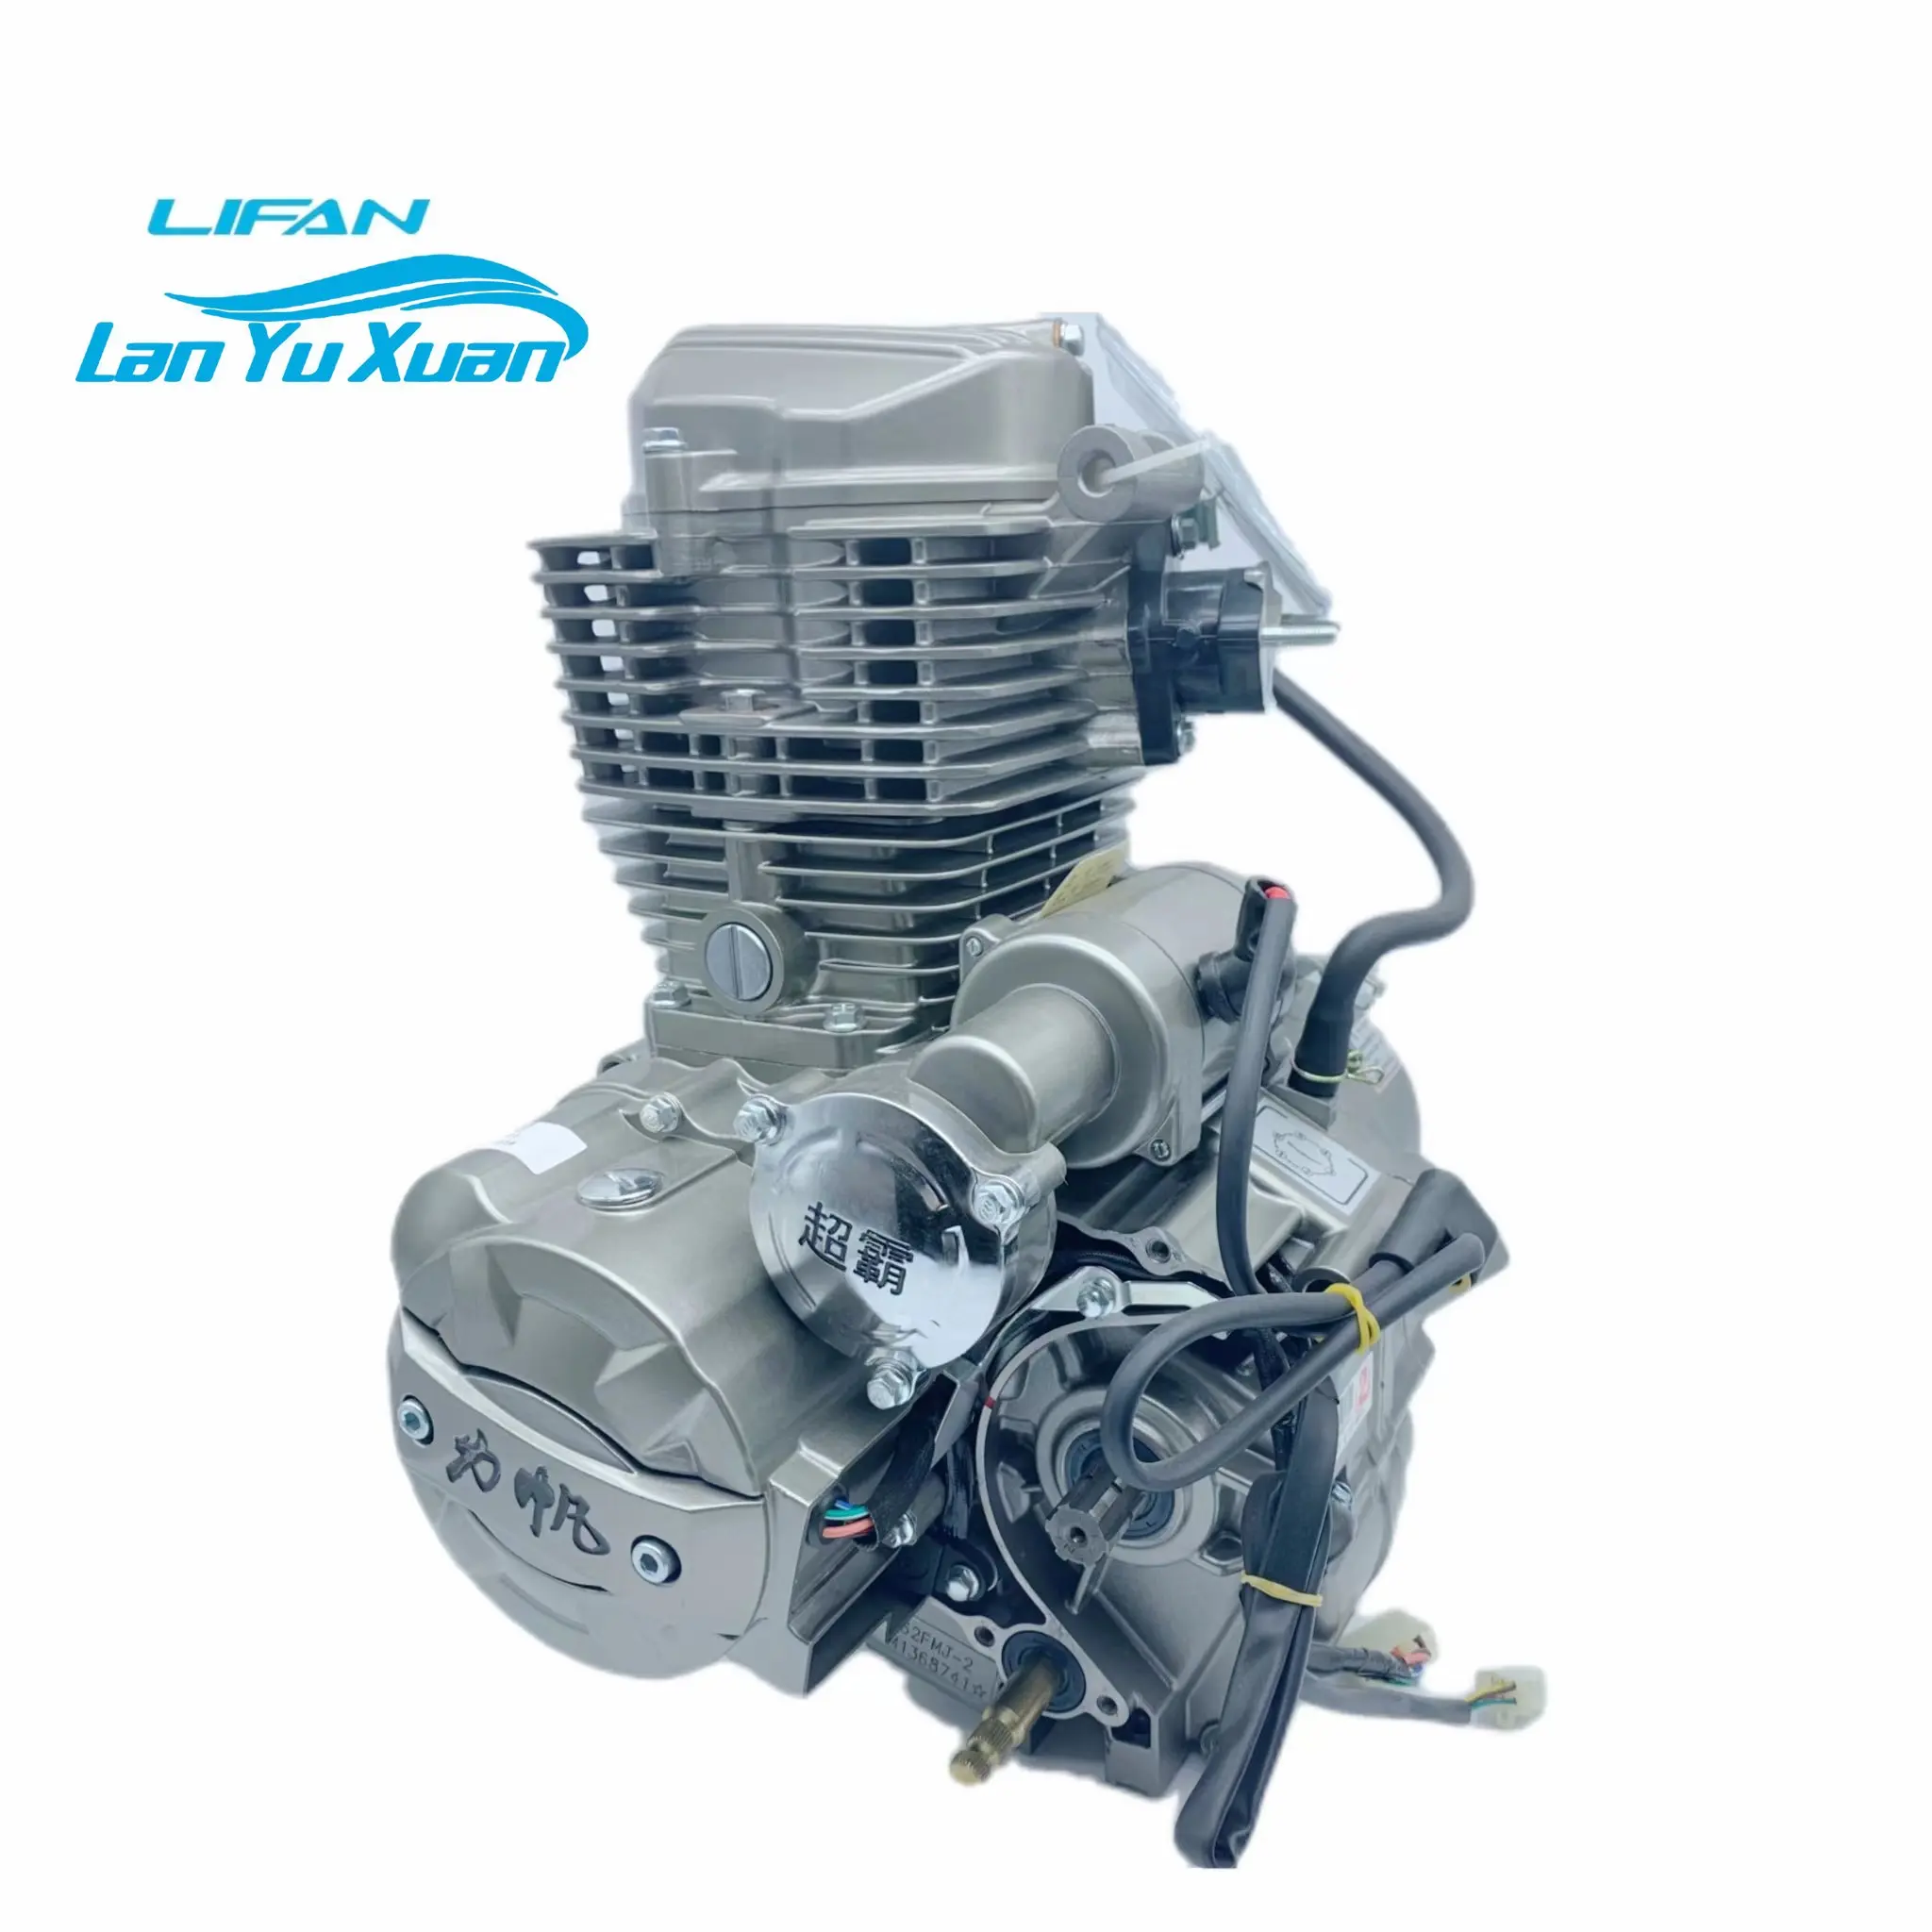 Hot selling Lifan motorcycle 250cc engine Engine motorcycle 250cc, China motorcycle Lifan engine tricycle suitable for freight 2021 new china cqr cross motorcycle dirt bike 250cc